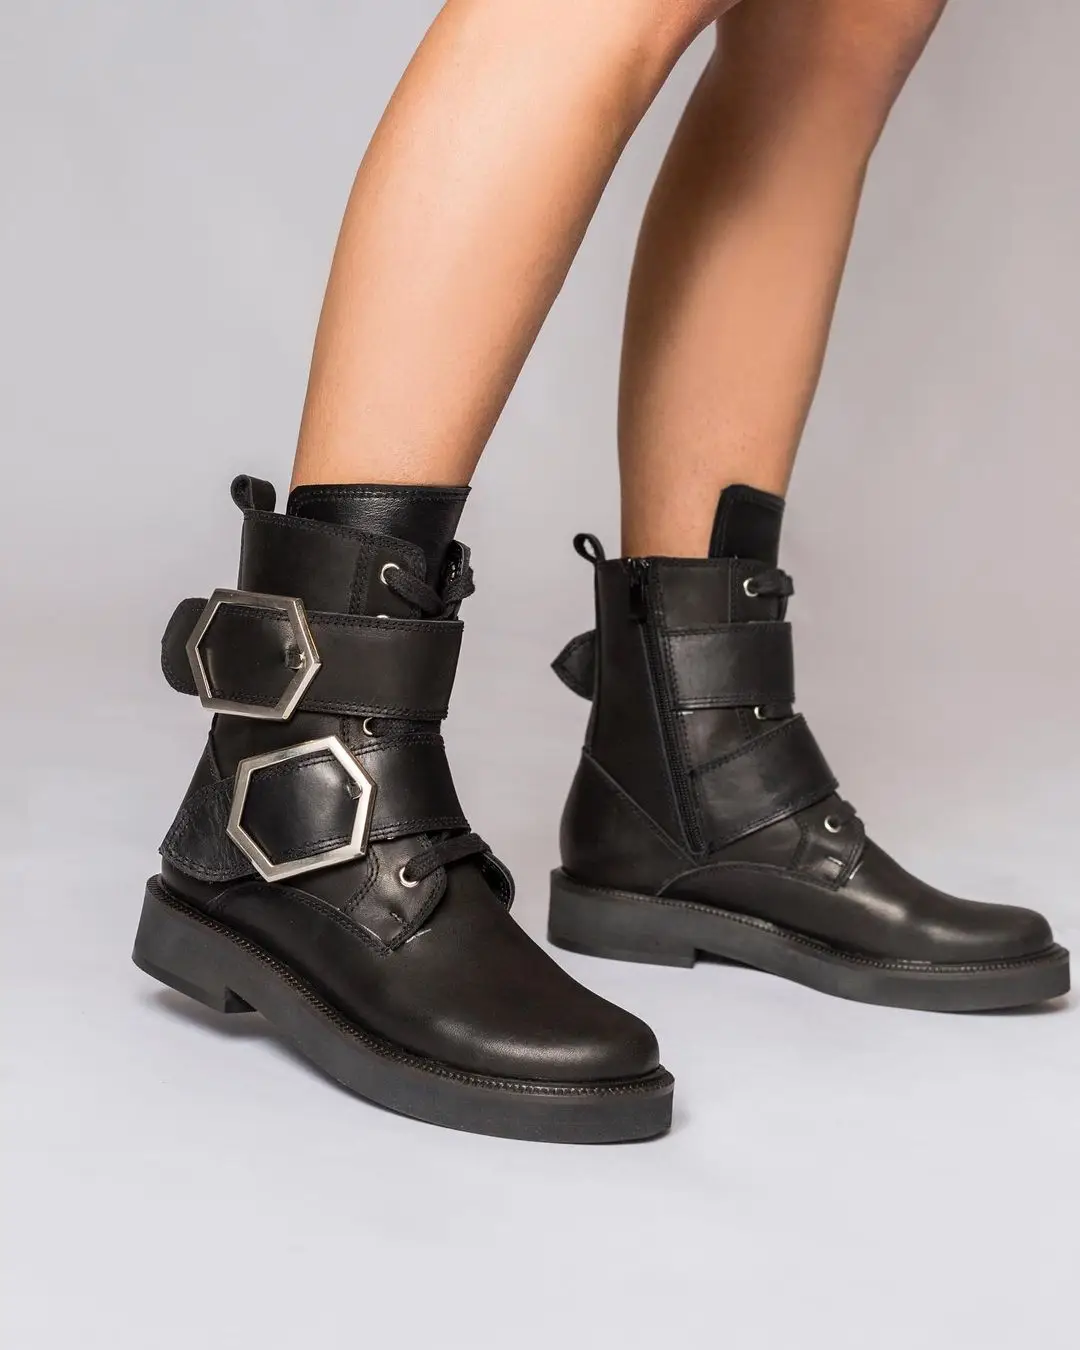 7 Fool-Proof Ways to Style Biker Boots ...